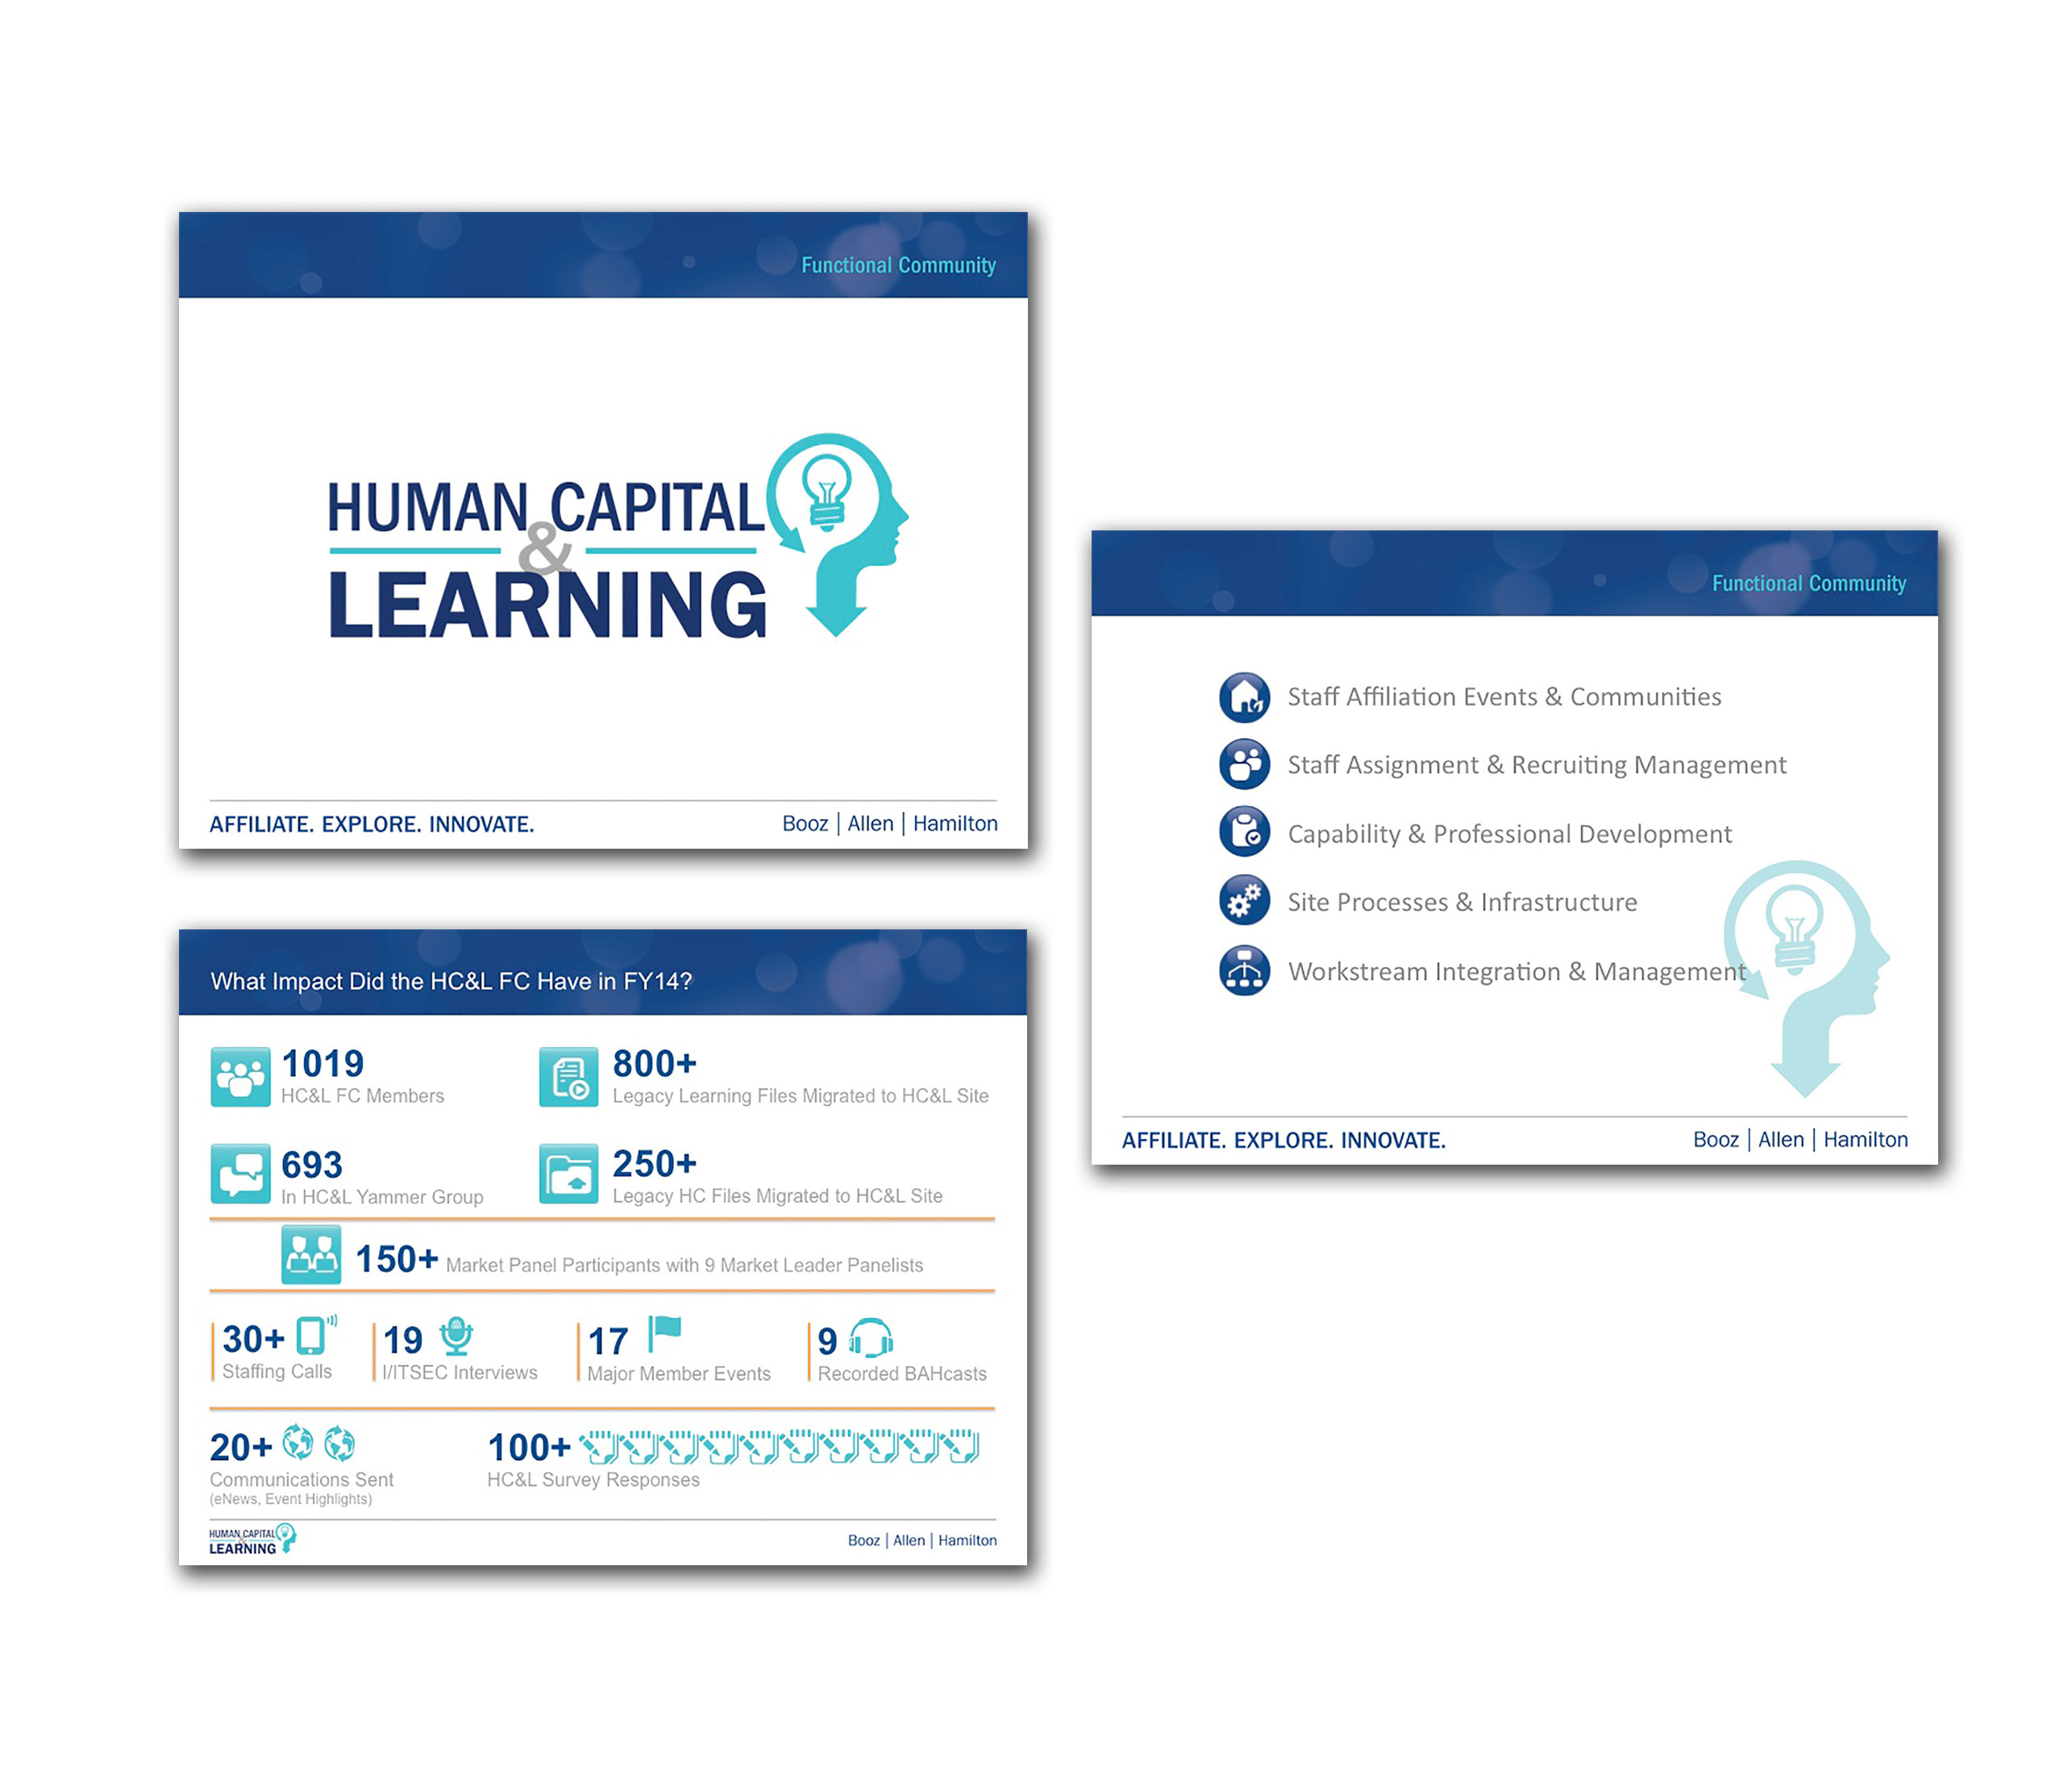 This image shows three slide samples from the Human Capital & Learning slide deck. This is an internal presentation to promote employee mentoring and collaboration. Design layout for these slides include graphic icons that represent subjects covered and infographics for data delivery.